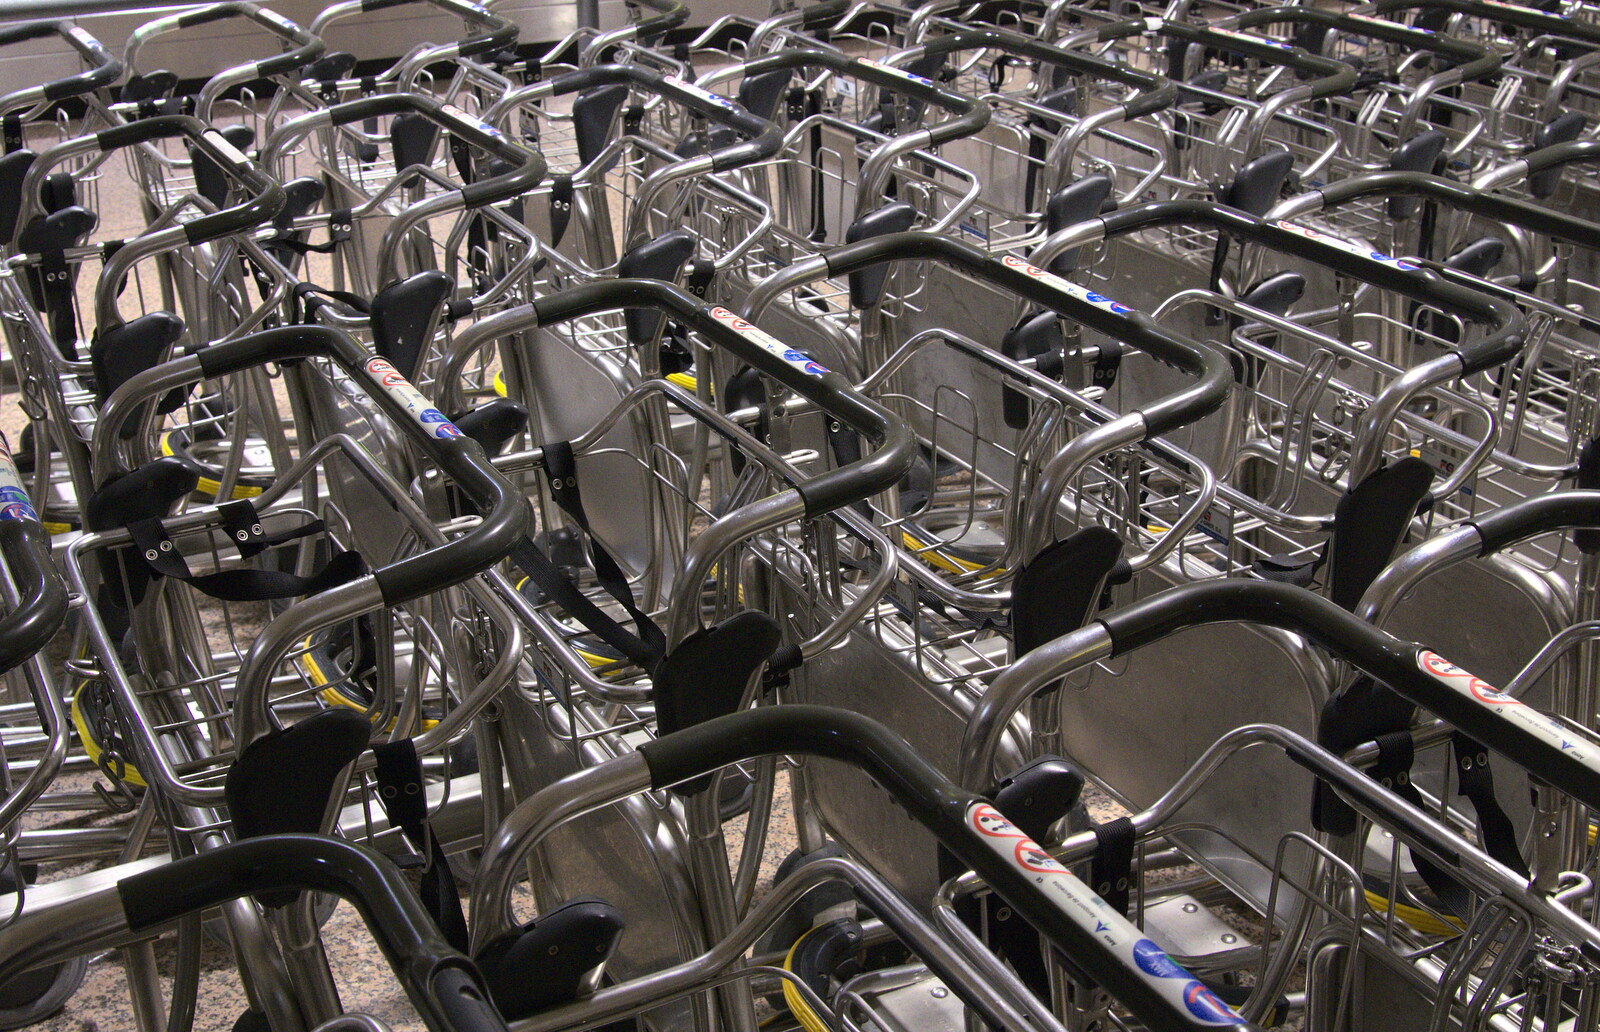 Hundreds of trolleys at the real Barcelona Airport from The Open Education Challenge, Barcelona, Catalonia - 13th July 2014